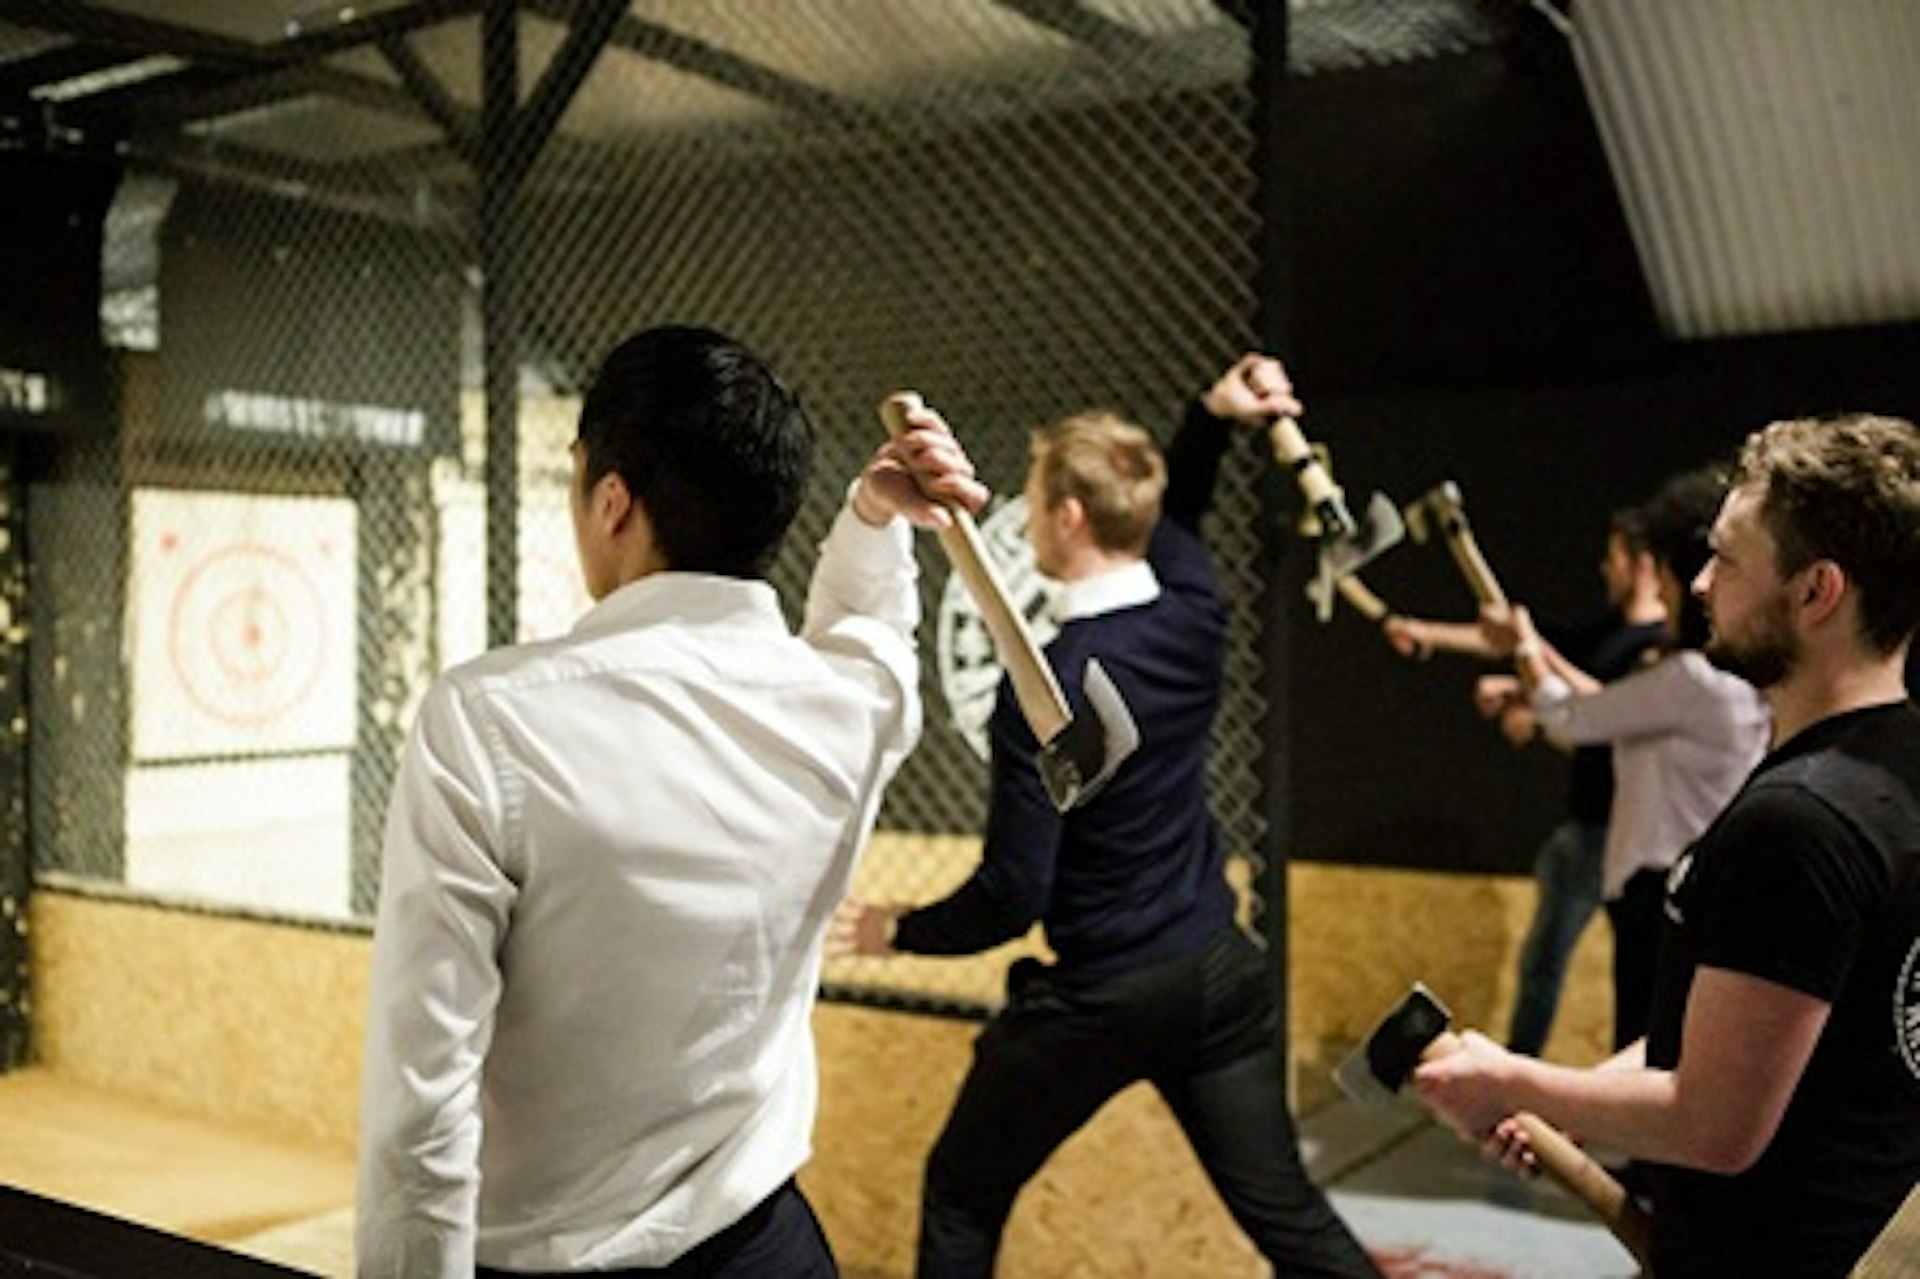 Urban Axe Throwing for Two at Whistle Punks, London 1